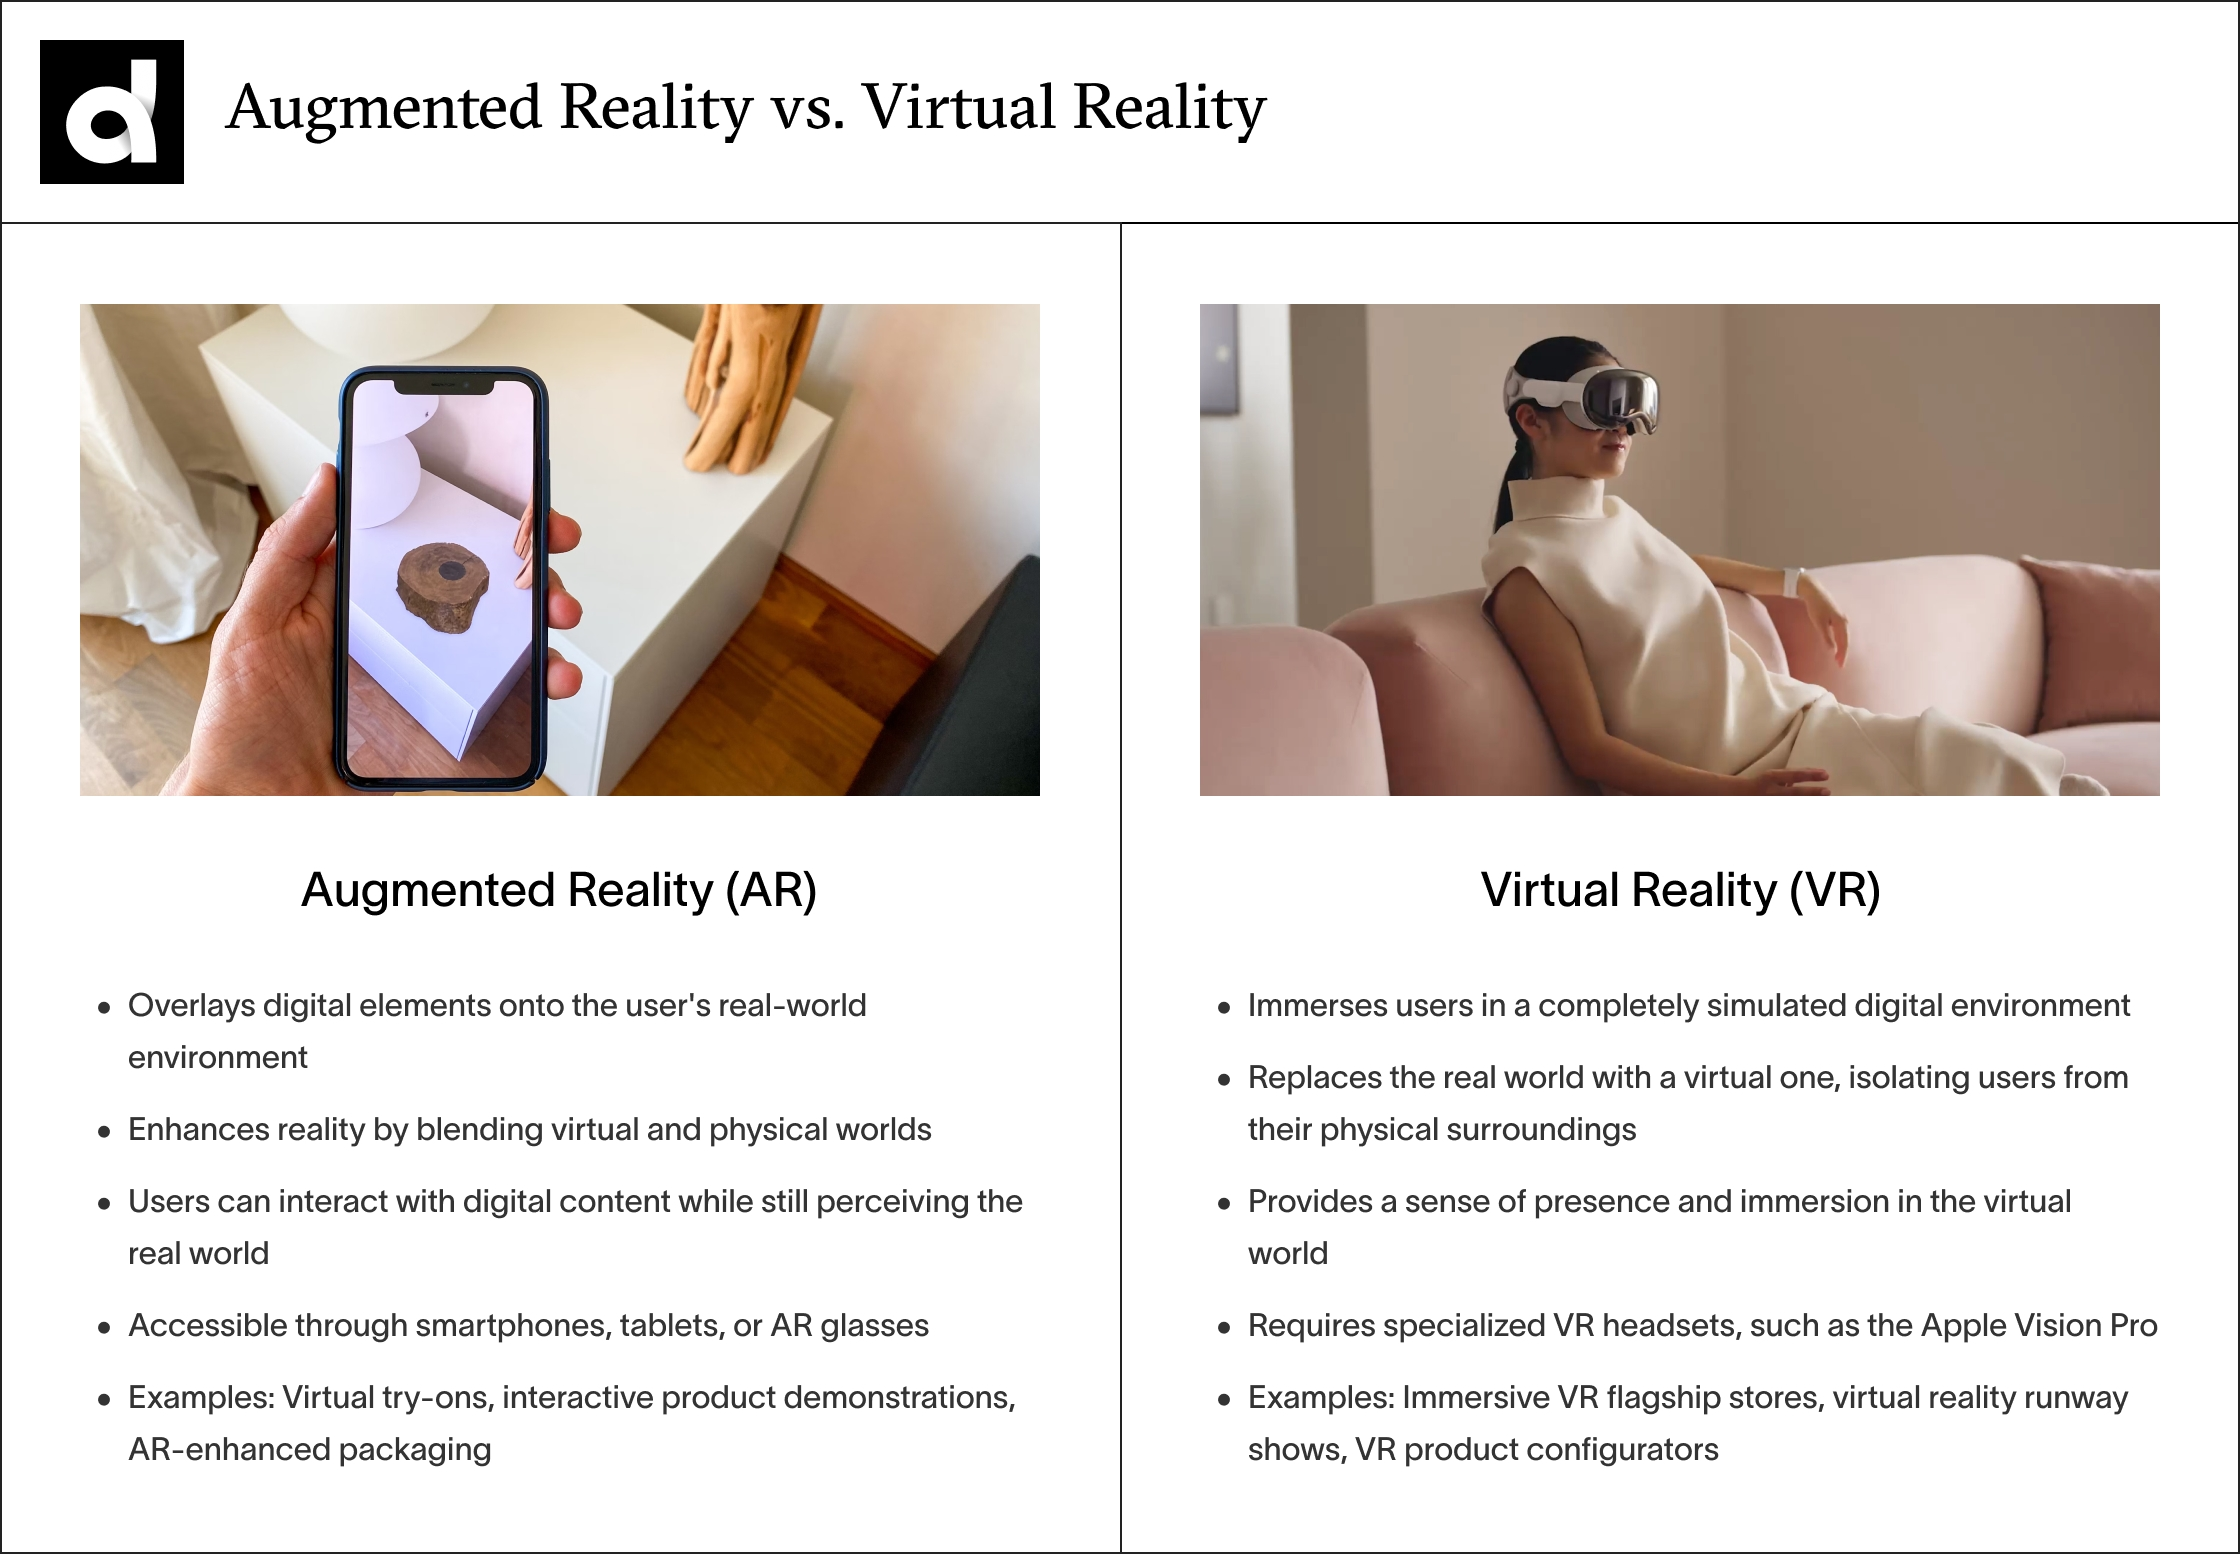 Augmented Reality (AR) vs Virtual Reality (VR) the difference